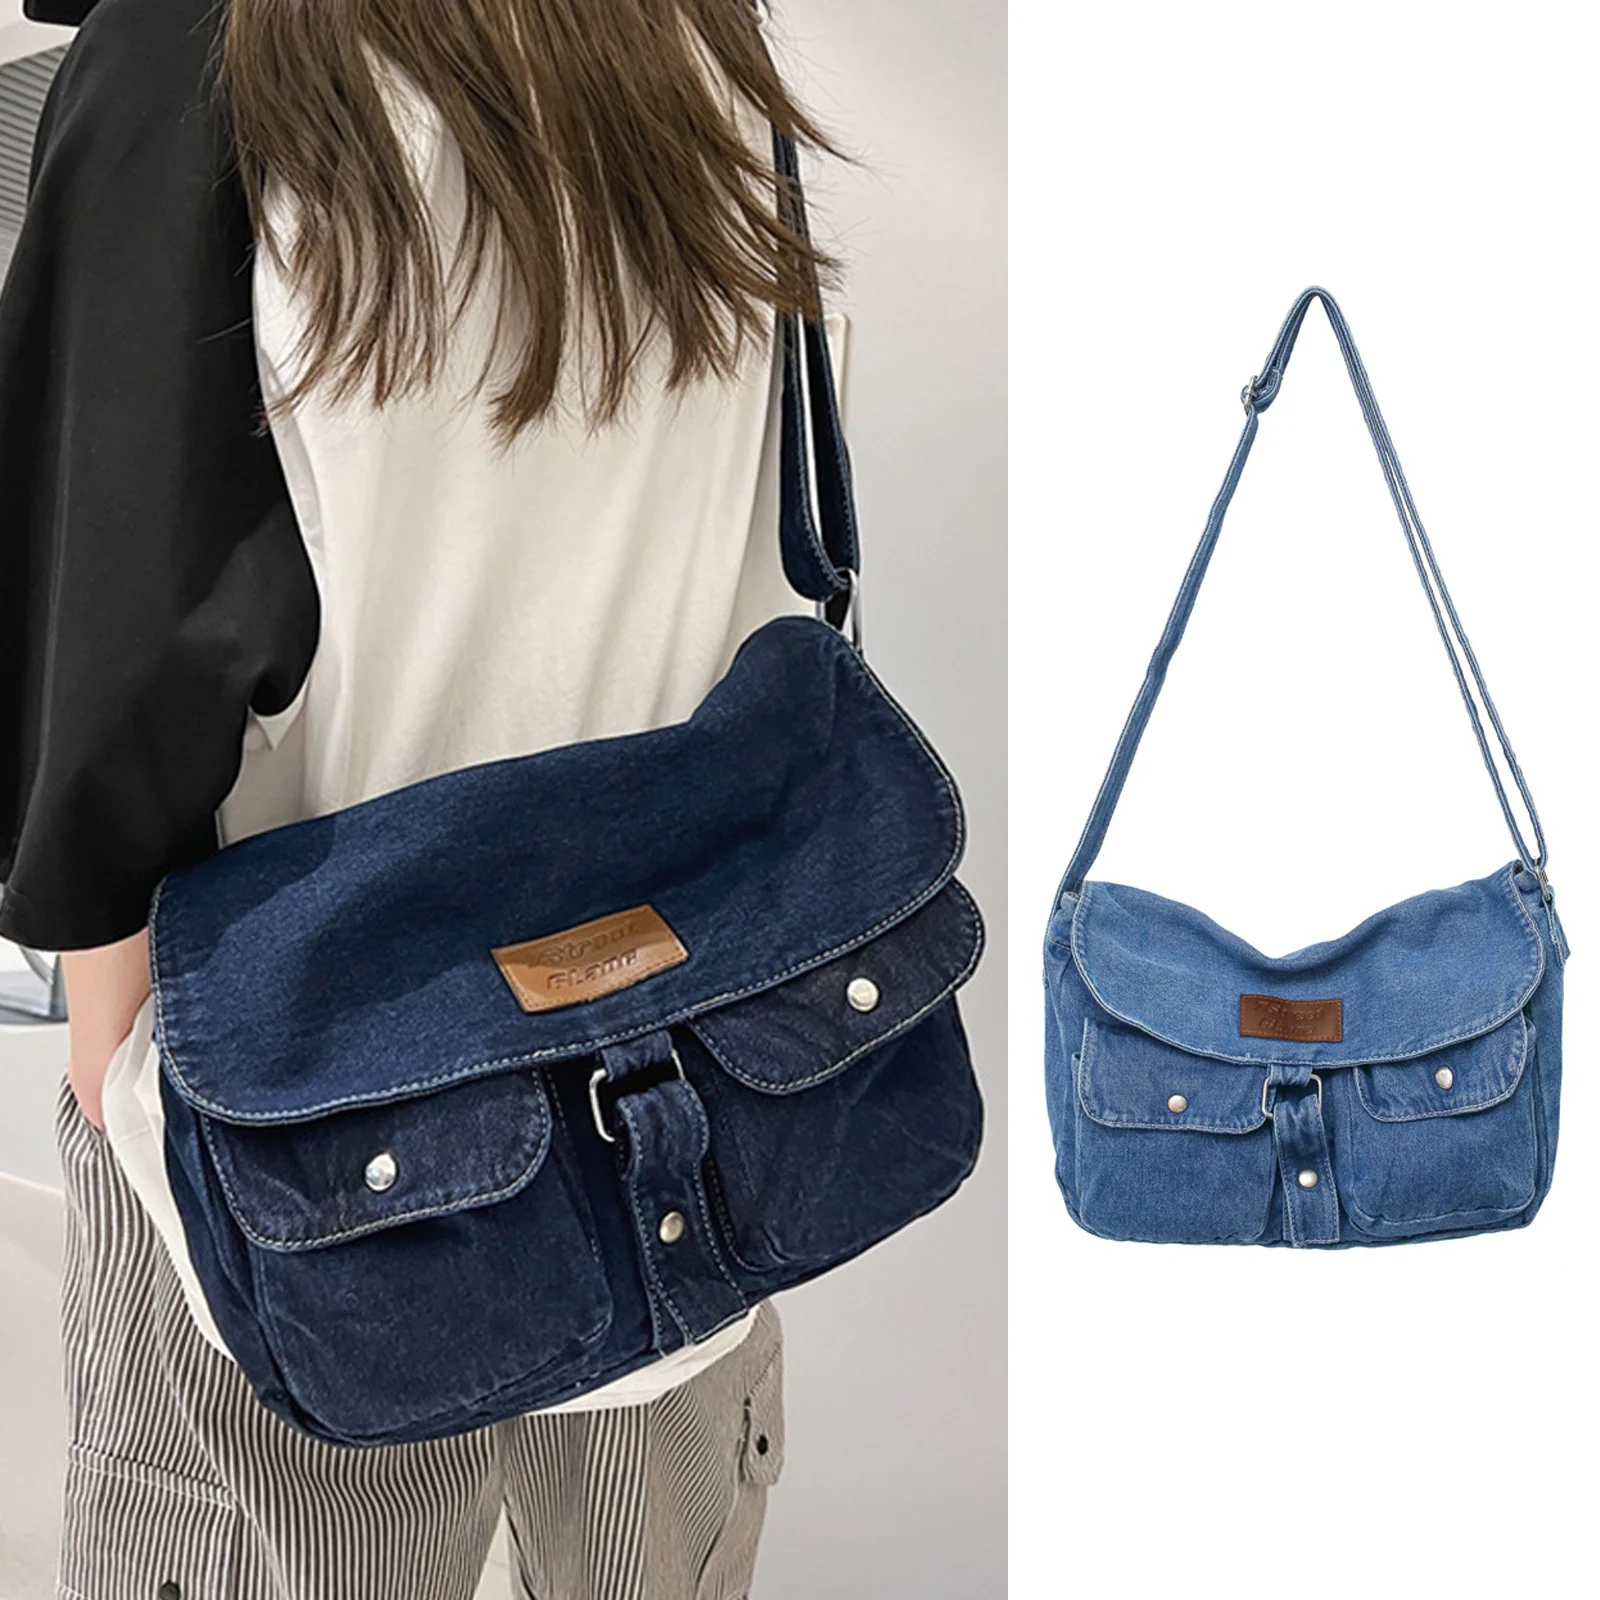 Designer Coussin PM Denim Crossbody Bag With Big Sliver Chain For Women And  Men Luxury Leisure Handbag And Purse Ripple Wallet M57782/M7790 From  Fashionbagbags018, $46.96 | DHgate.Com